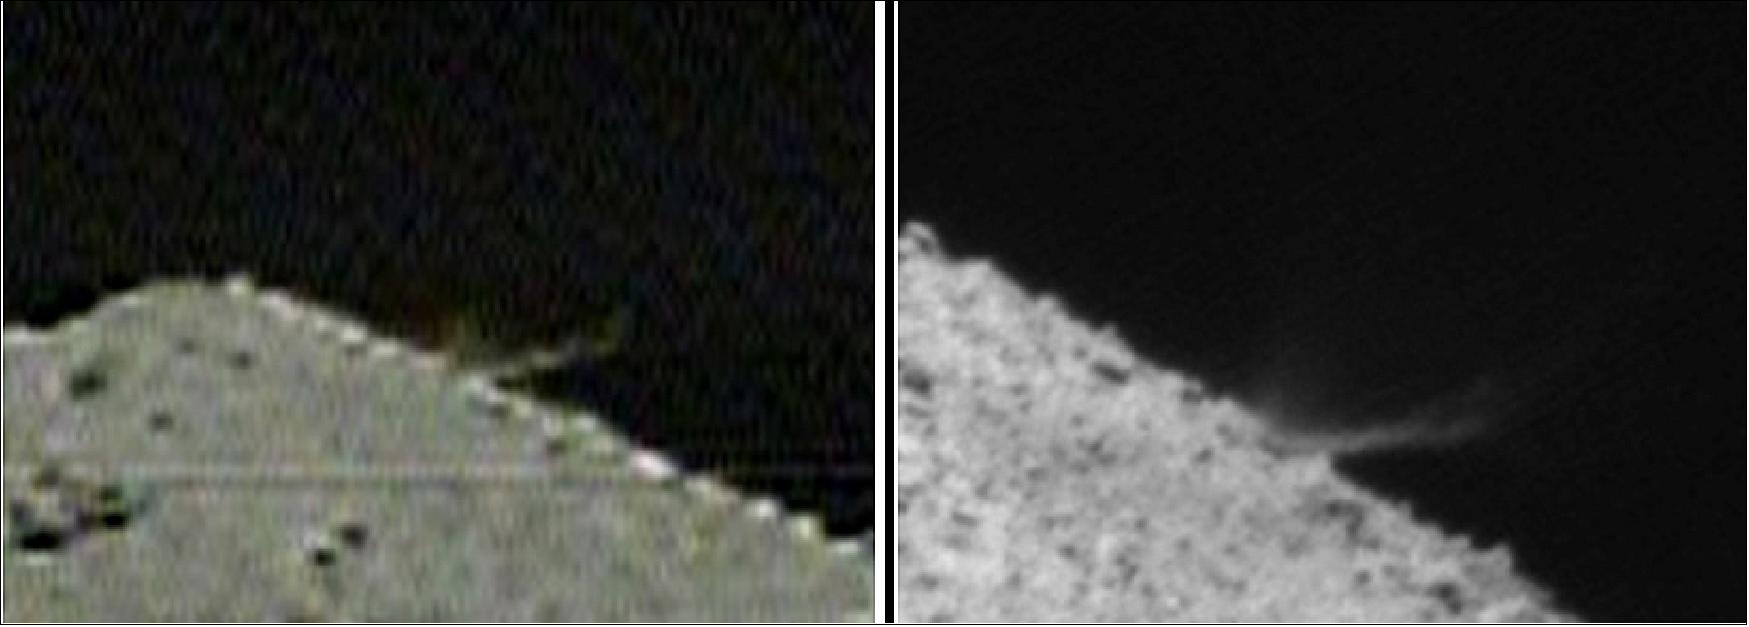 Figure 46: Impact event captured by two cameras equipped on DCAM3. Left: DCAM3-A (640 x 480 pixels analog camera), 2 seconds after impact. Right: DCAM3-D (2000 x 2000 pixels digital camera), 3 seconds after impact (image credit: Hayabusa-2 Team)